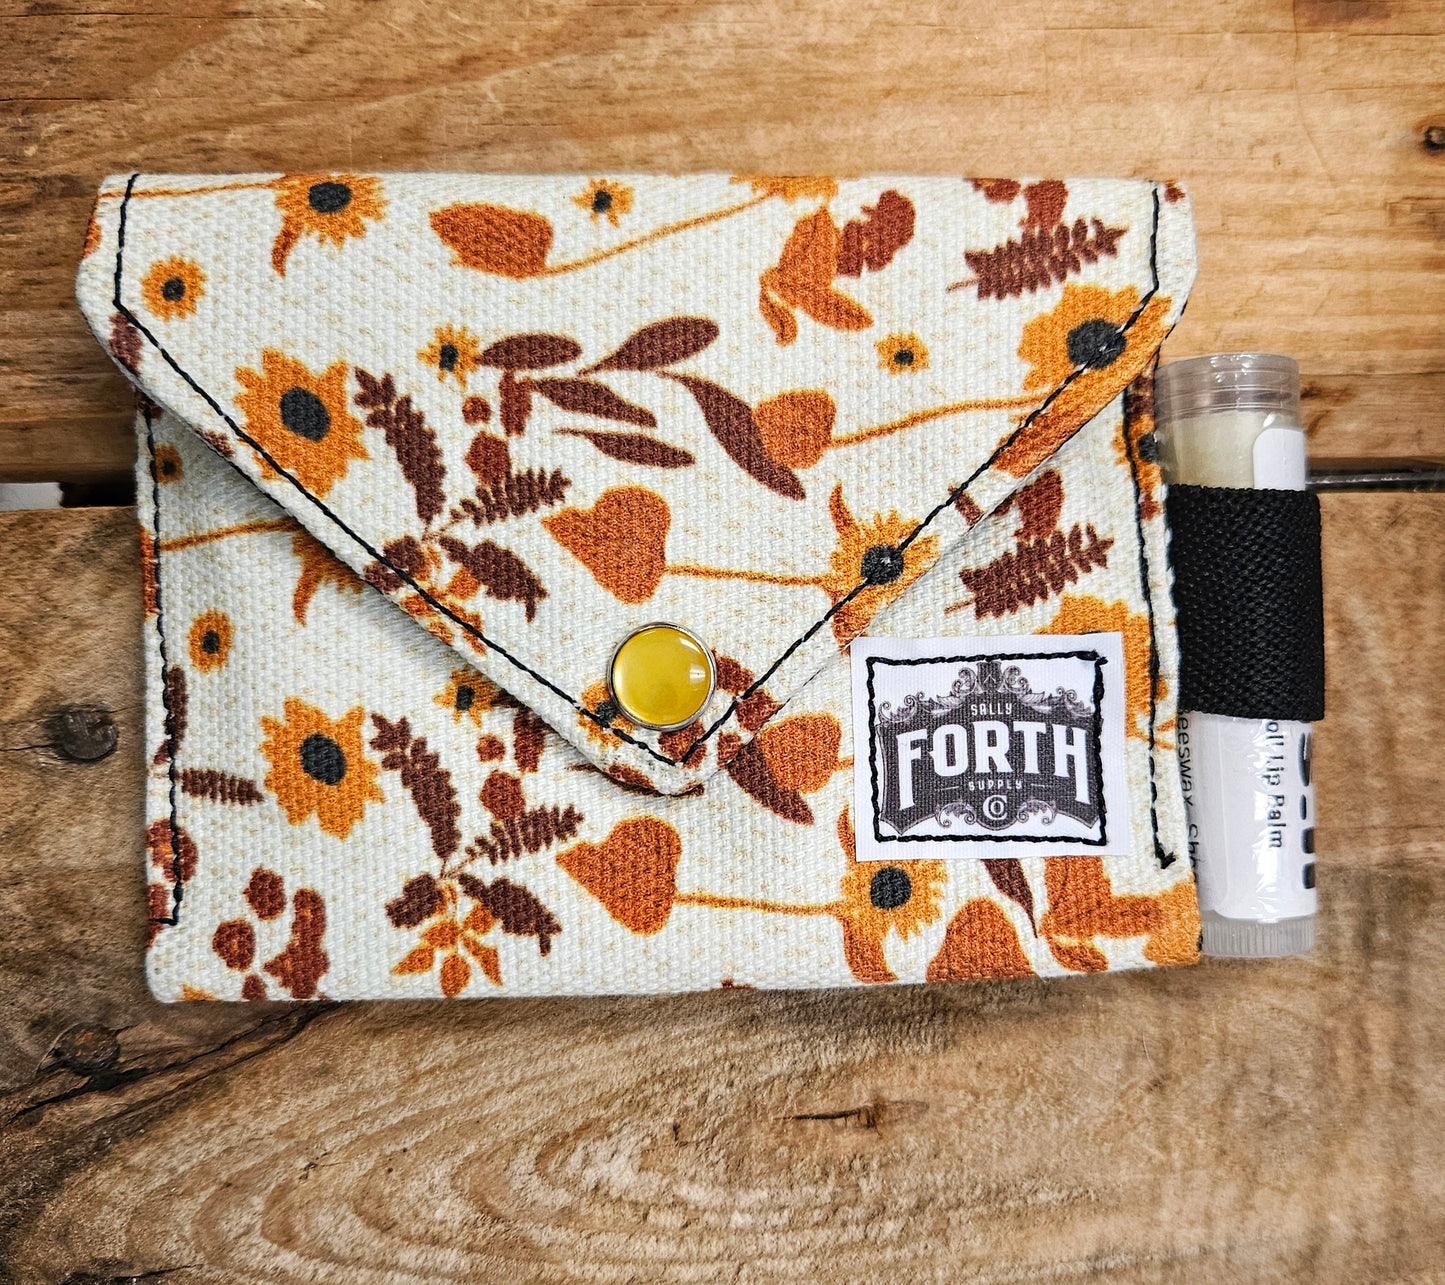 The Original Chapstick Wallet! The Avail: Prarie - Sally Forth Supply Co.